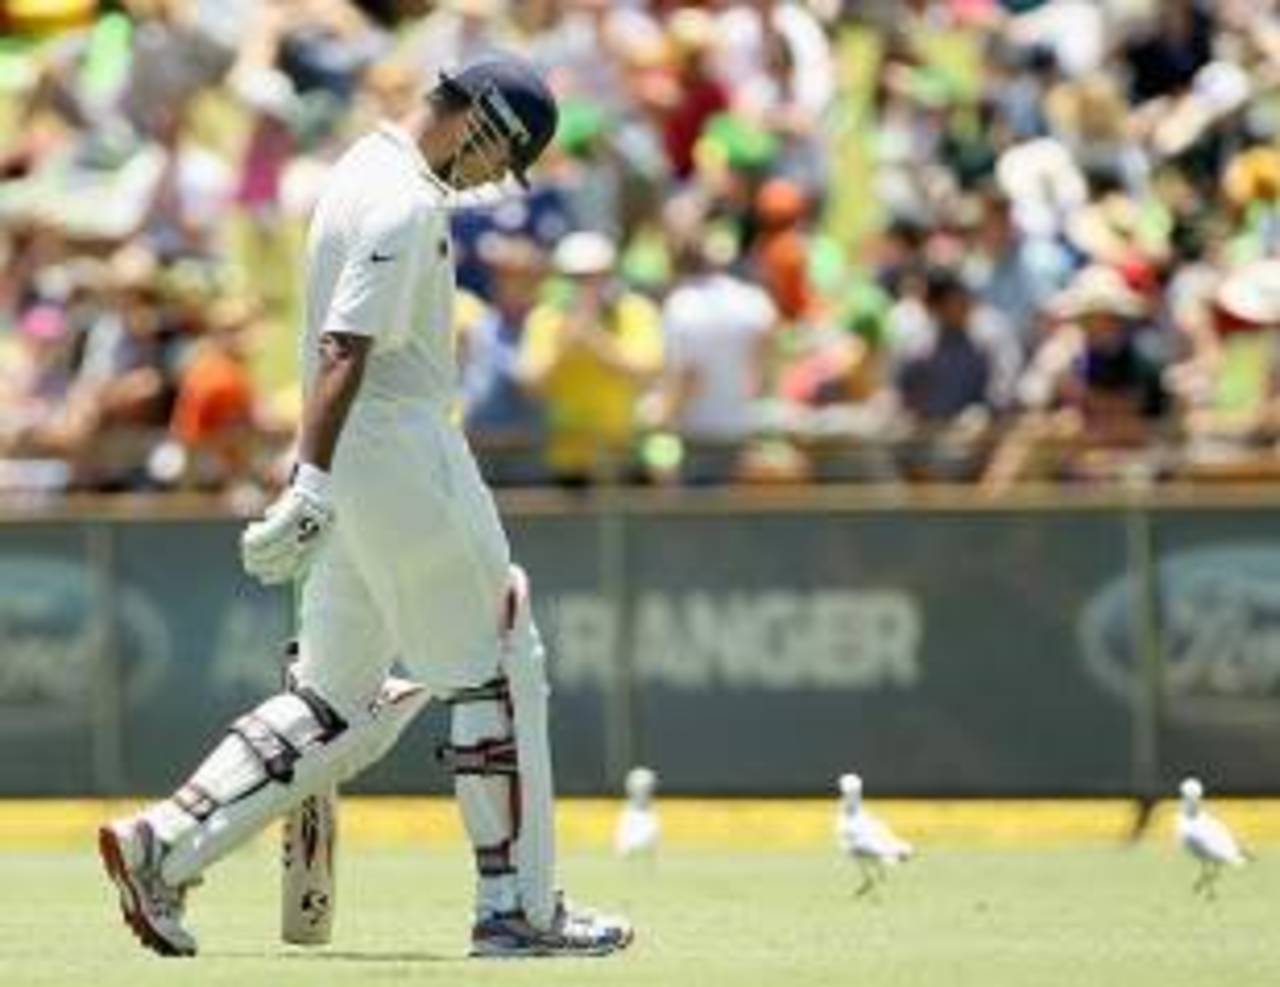 Rahul Dravid walks back after being dismissed, Australia v India, 3rd Test, Perth, 3rd day, January 15, 2012